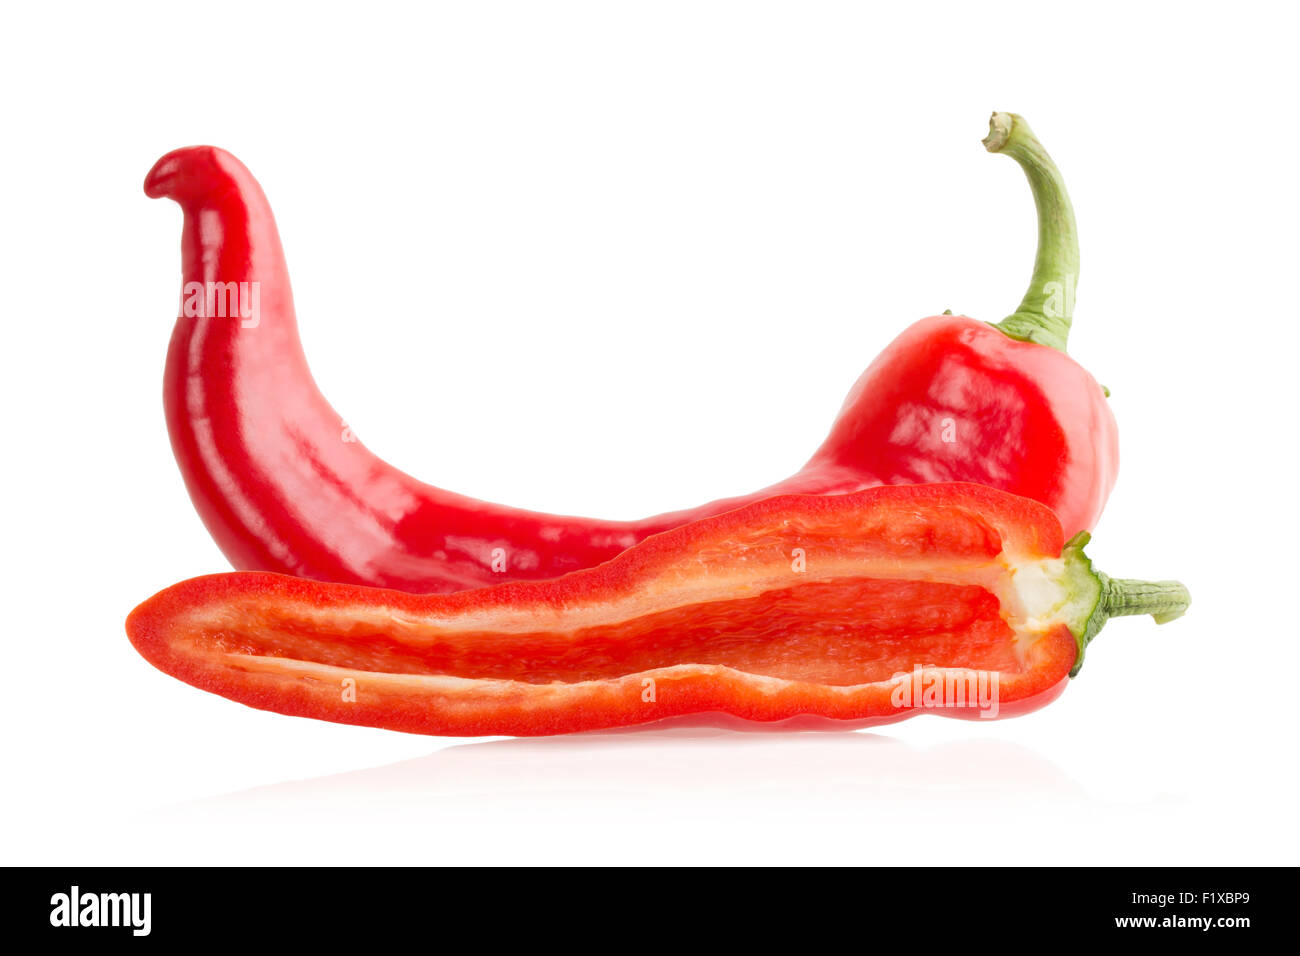 Red pepper and slice. Stock Photo